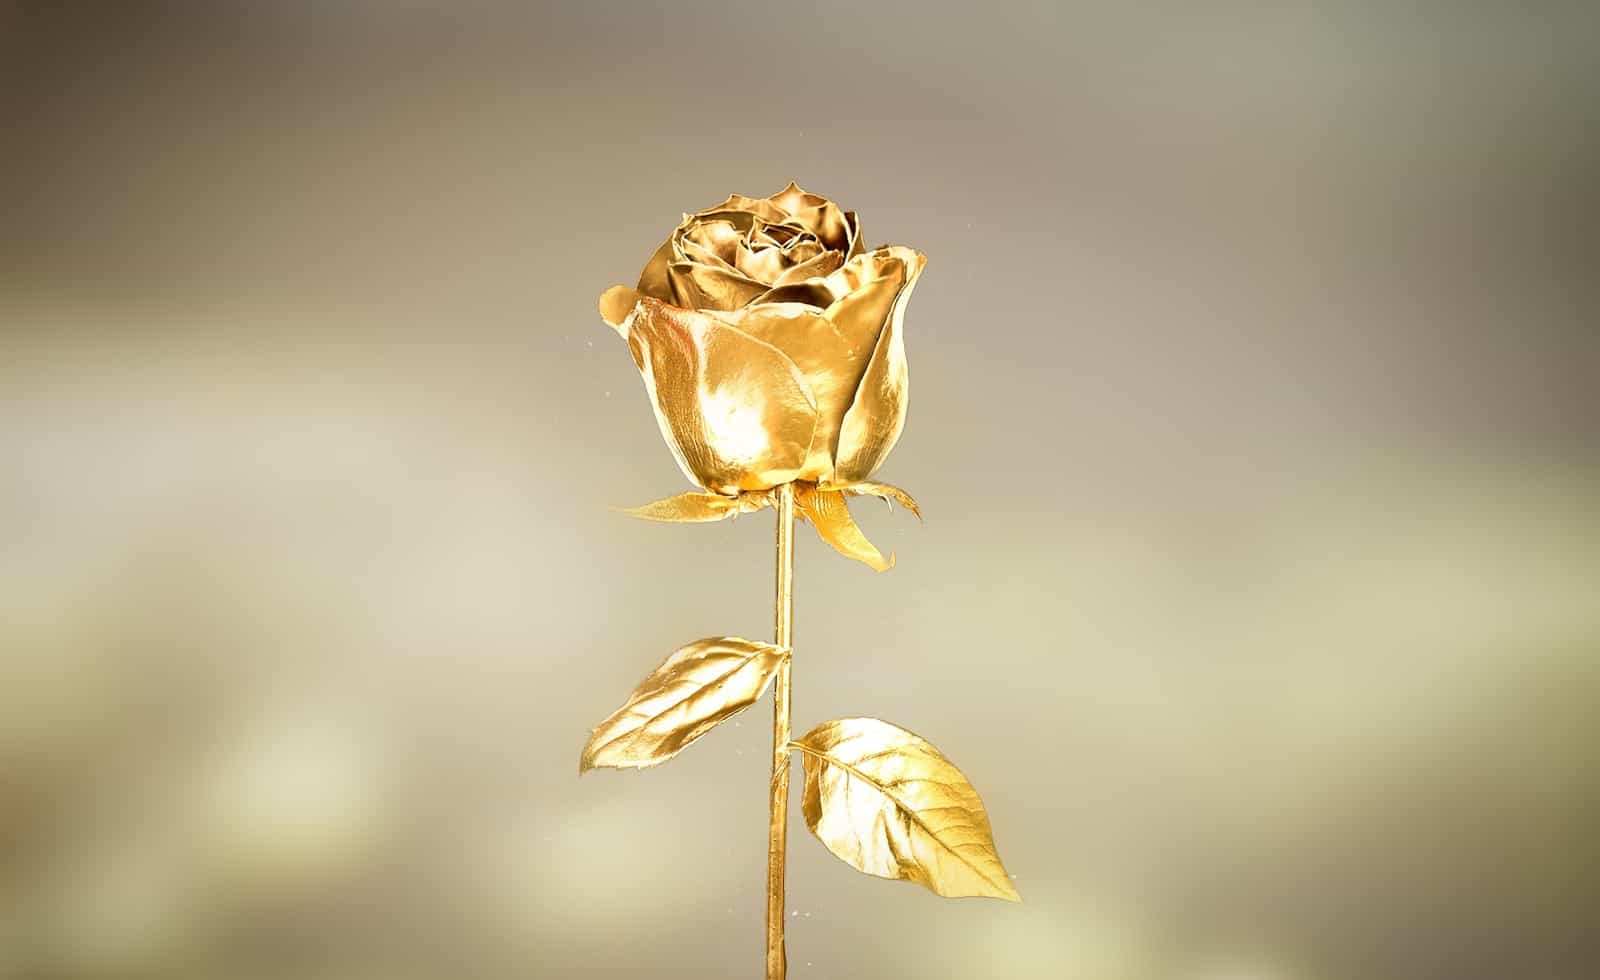 An illustrative image of a golden rose with a plain, blurry background.